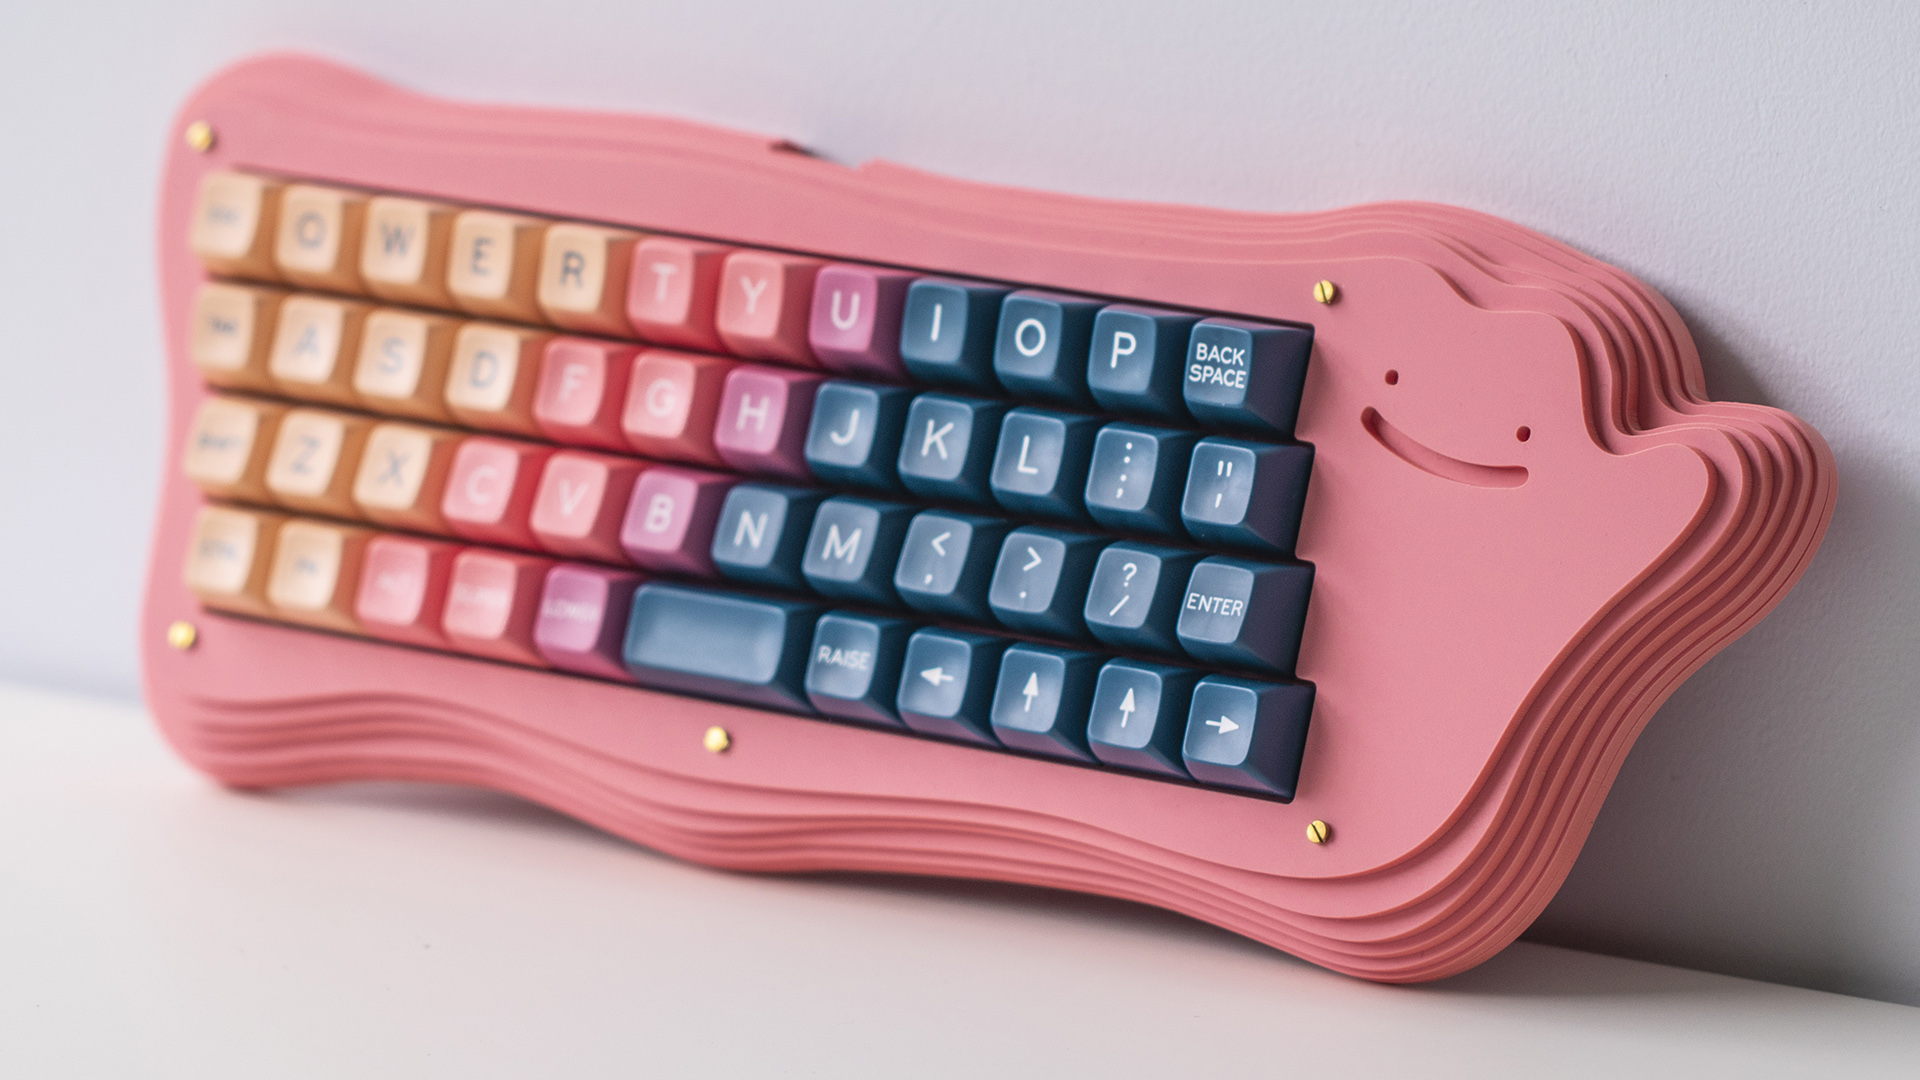 From the creator of the Cyberpunk keeblade comes an adorable Ditto keyboard  | PC Gamer